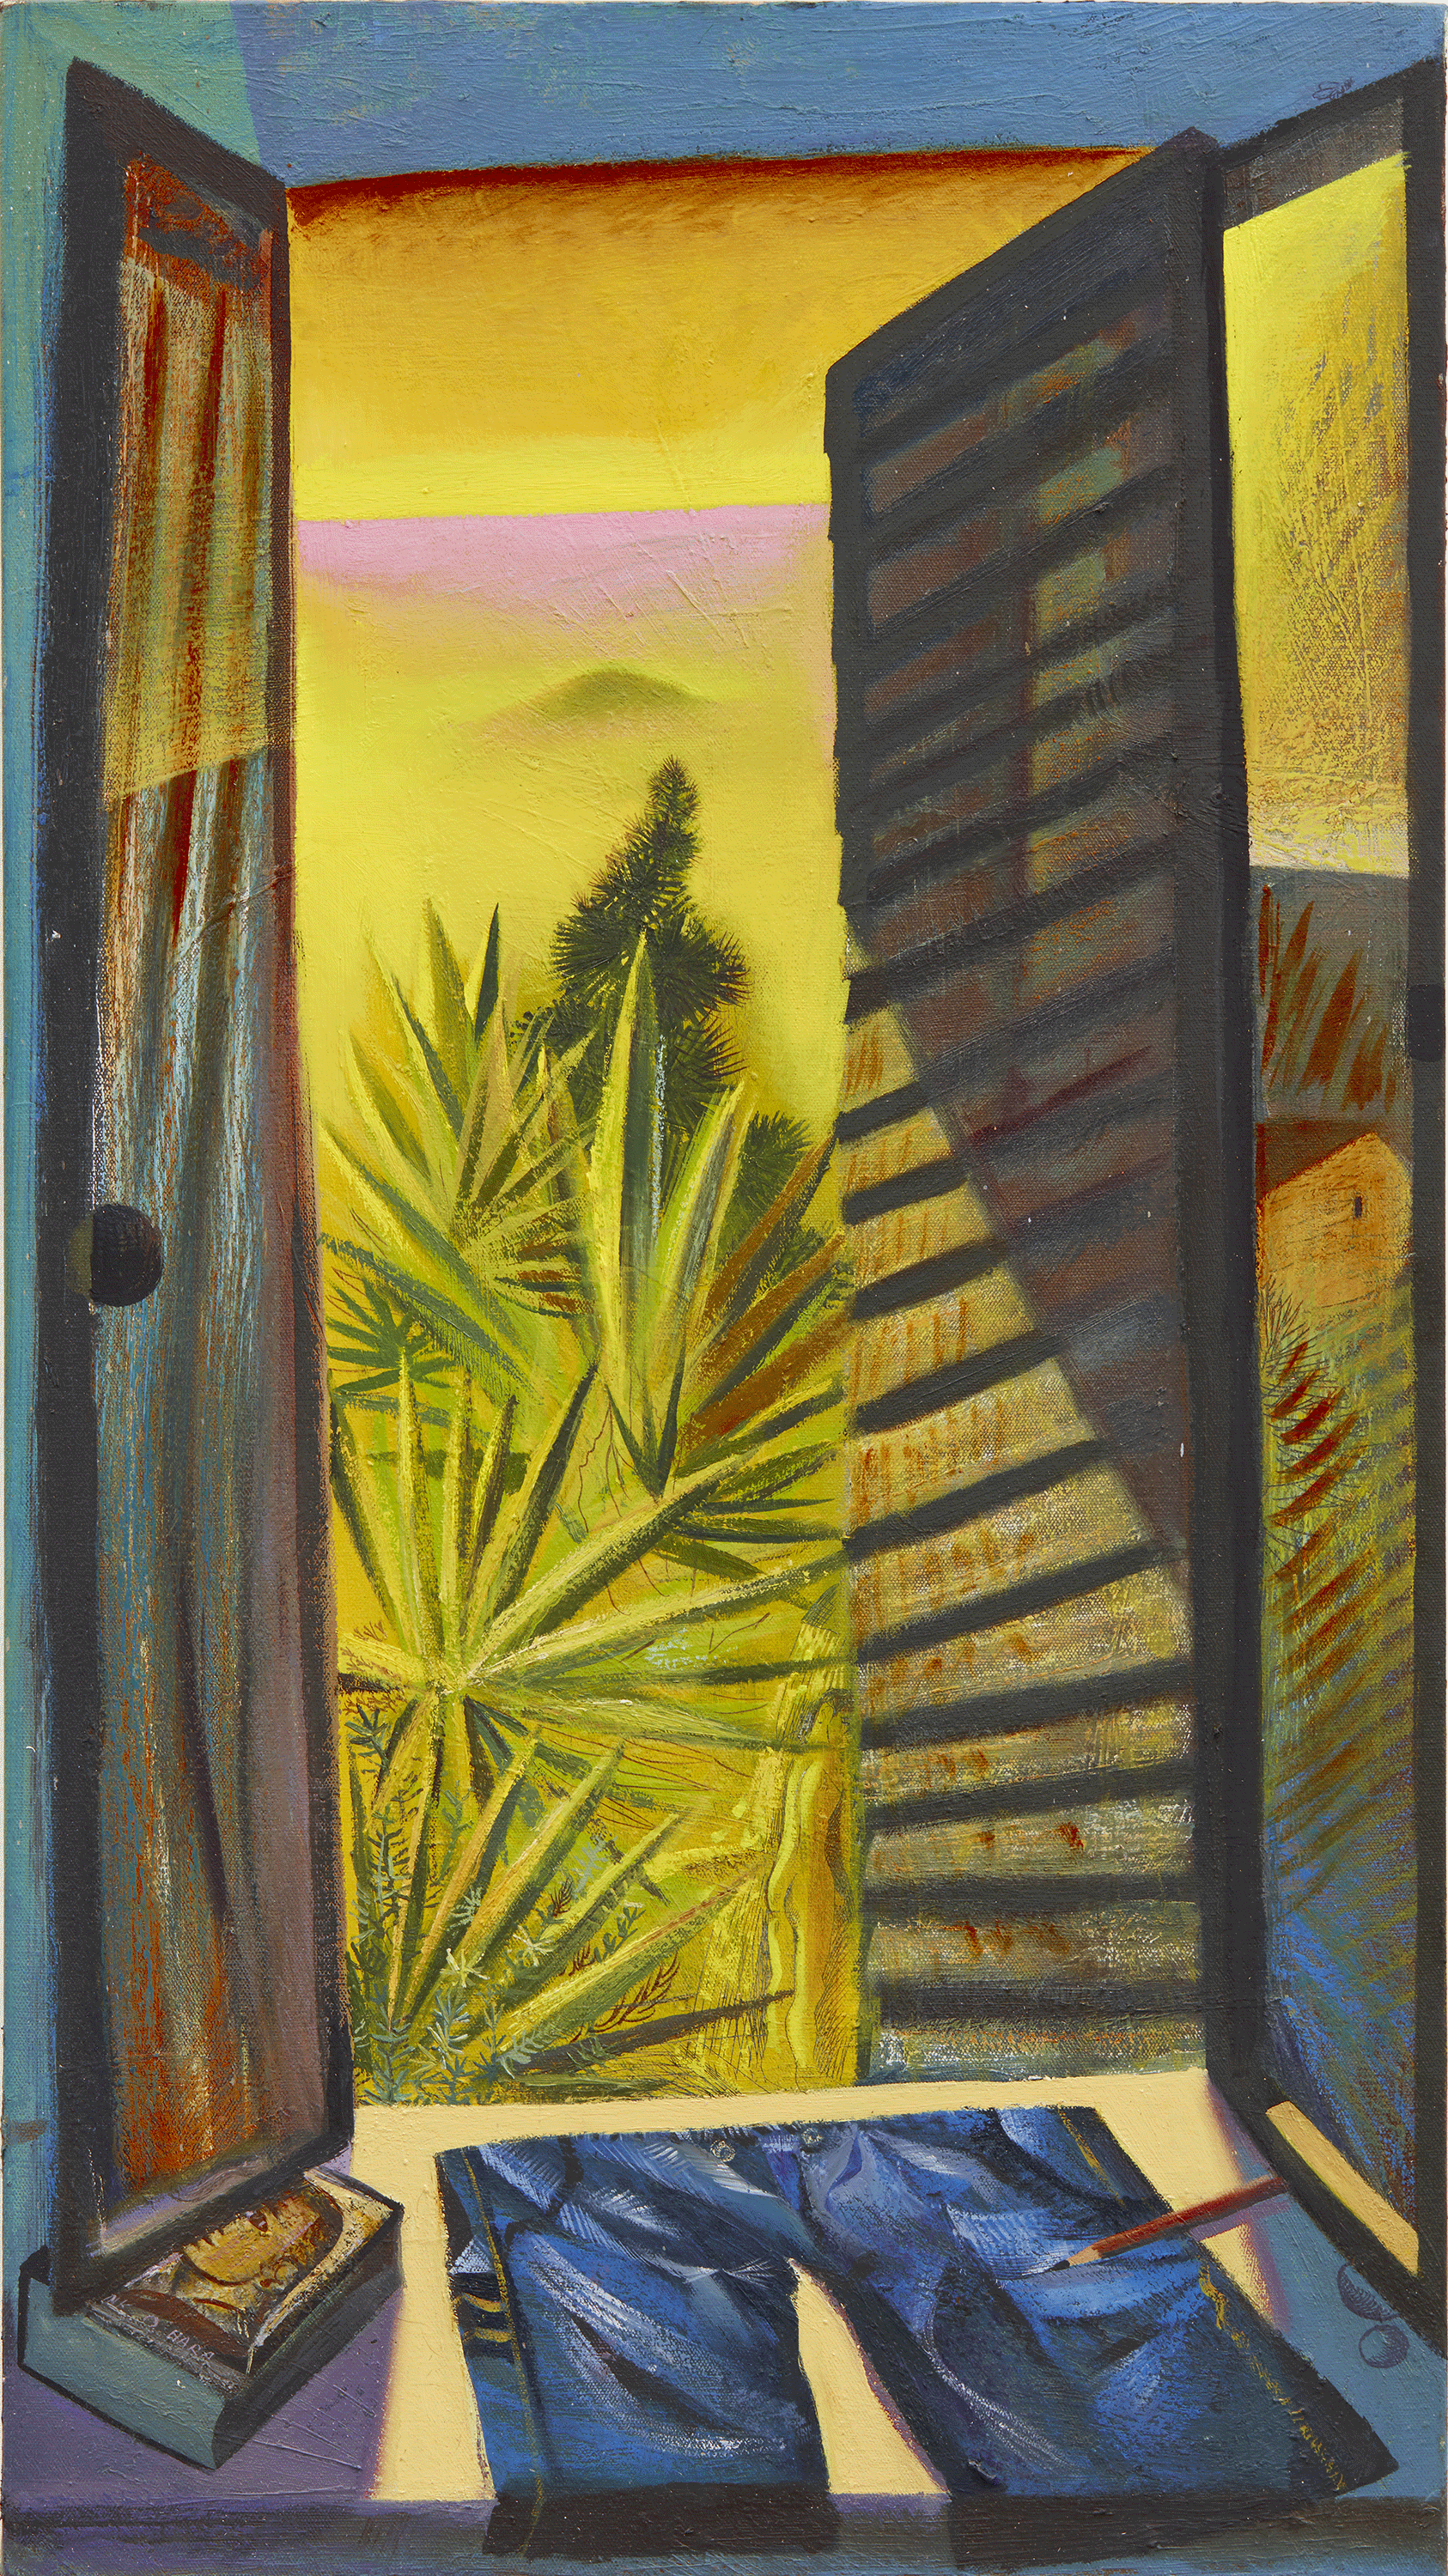 Vibrant stylized painting looking out a window onto vegetation and a pink and yellow sky. A pair of shorts and a book rest on the windowsill.